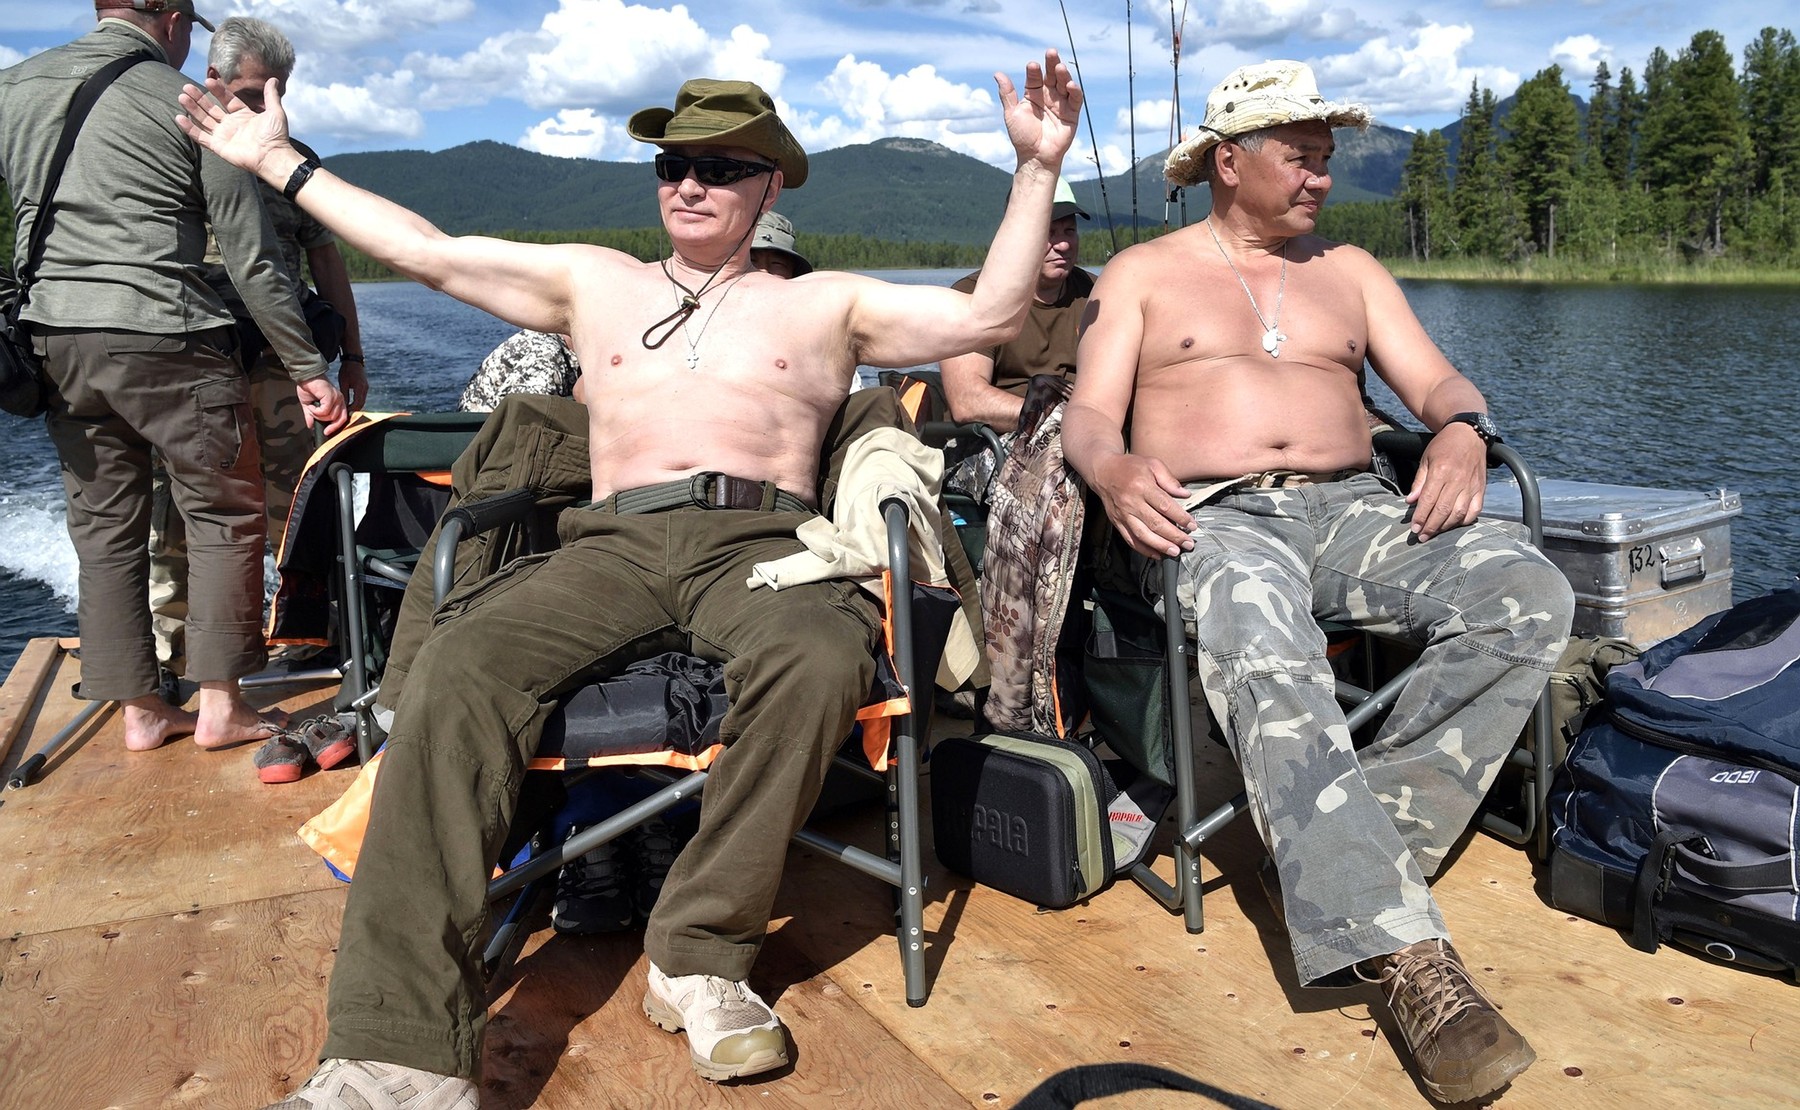 August 3, 2017 - Tyva, Tyva, Russia - Russian President Vladimir Putin, left, and Defense Minister Sergei Shoigu relax in the sun shirtless after fishing during a three-day fishing and hunting adventure in the Siberian wilderness near the Mongolian border August 1-3, 2017 in the Tyva Republic, Russia.,Image: 344547065, License: Rights-managed, Restrictions: , Model Release: no, Credit line: Profimedia